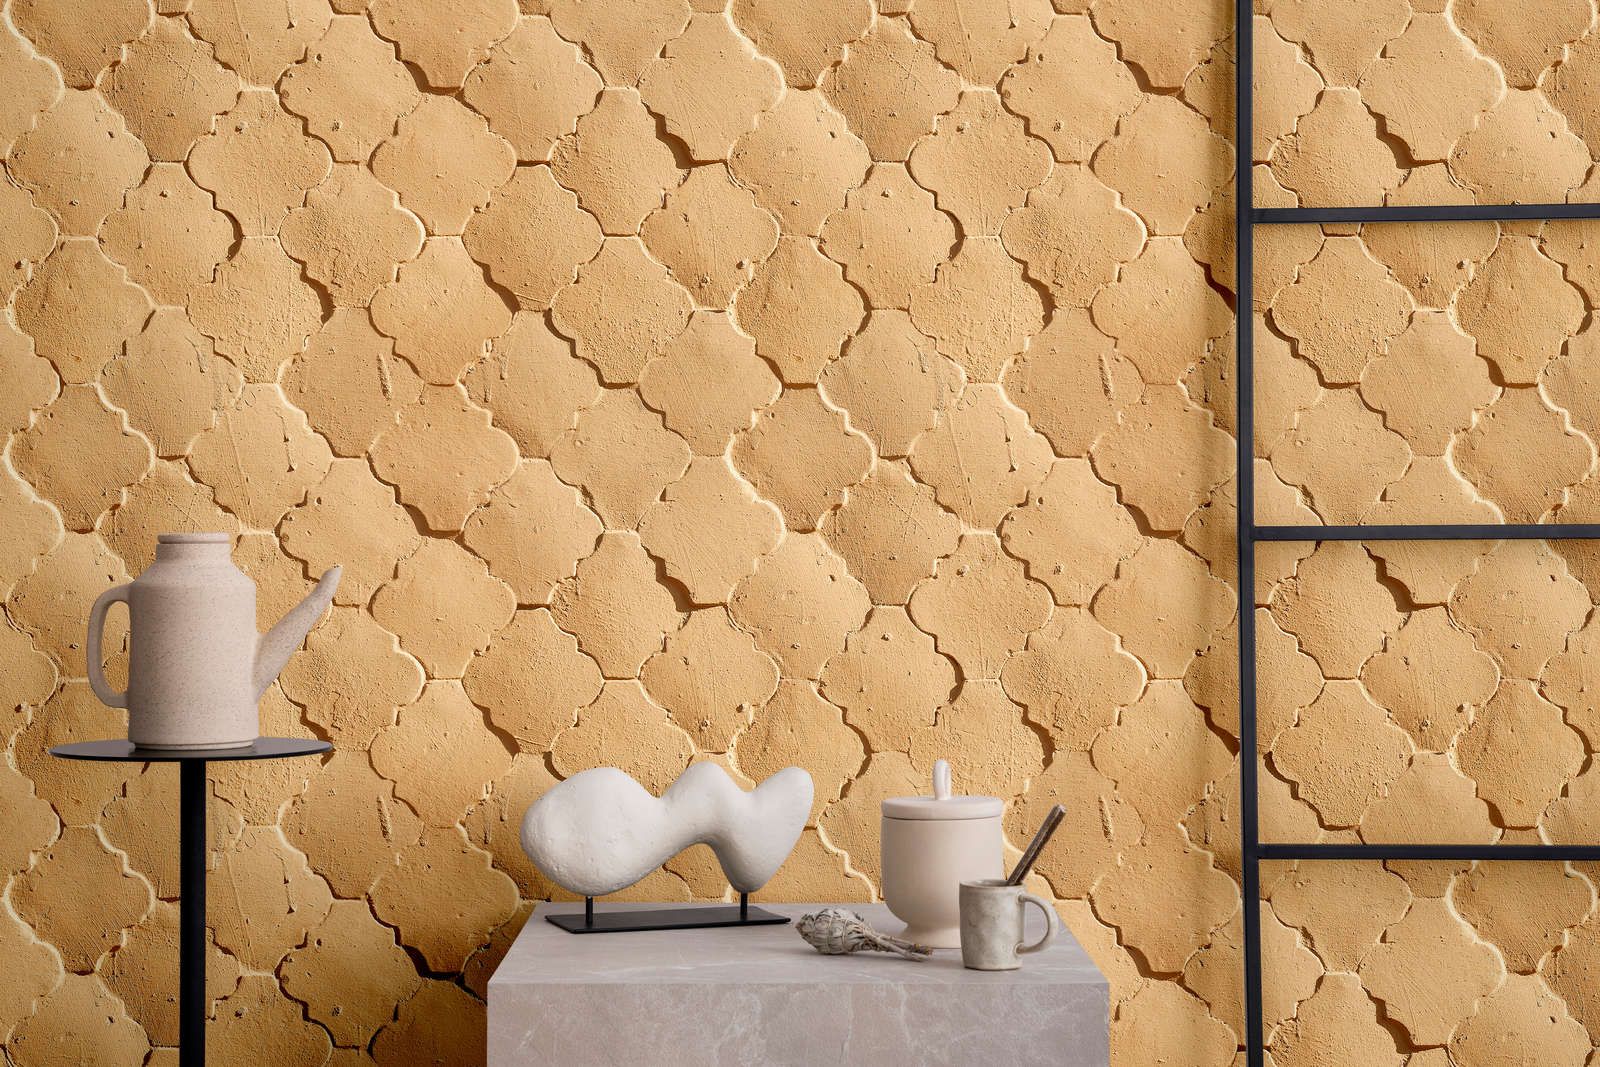             Photo wallpaper »siena« - Mediterranean tile pattern in sand colours - Lightly textured non-woven fabric
        